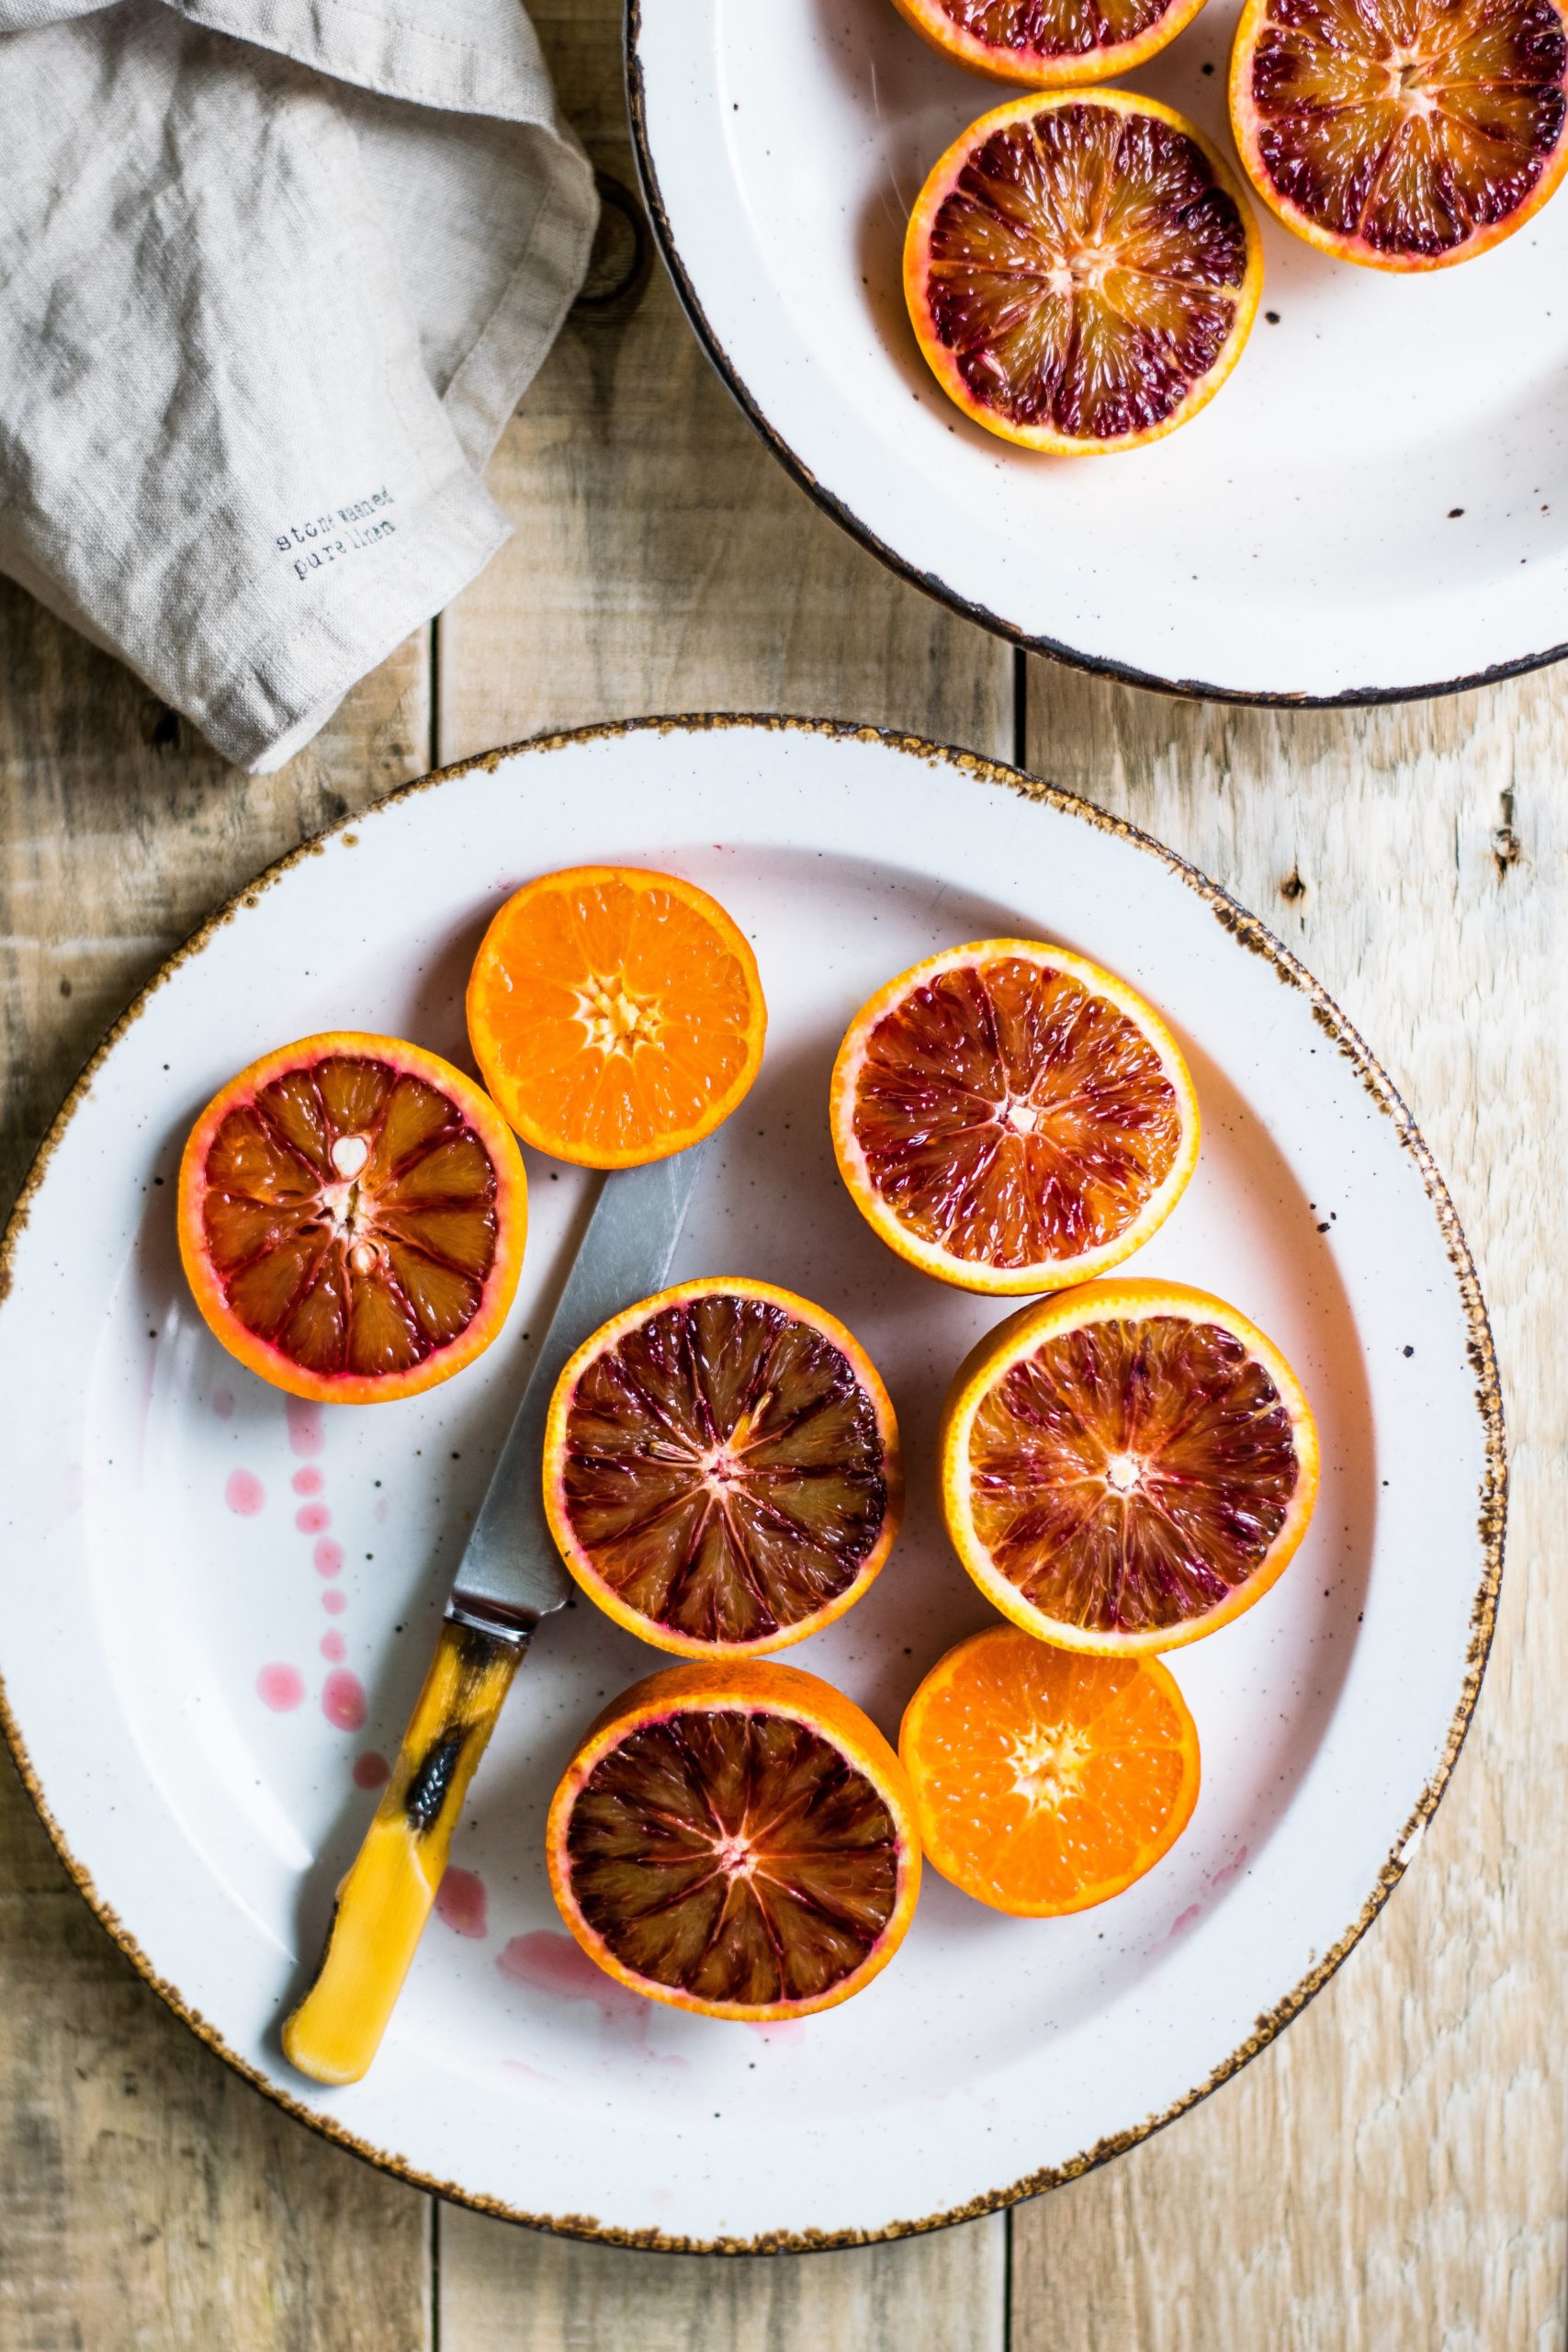 Blood Oranges sliced in half on a white plate. The knife is laying between oranges on the plate, with juice around it.